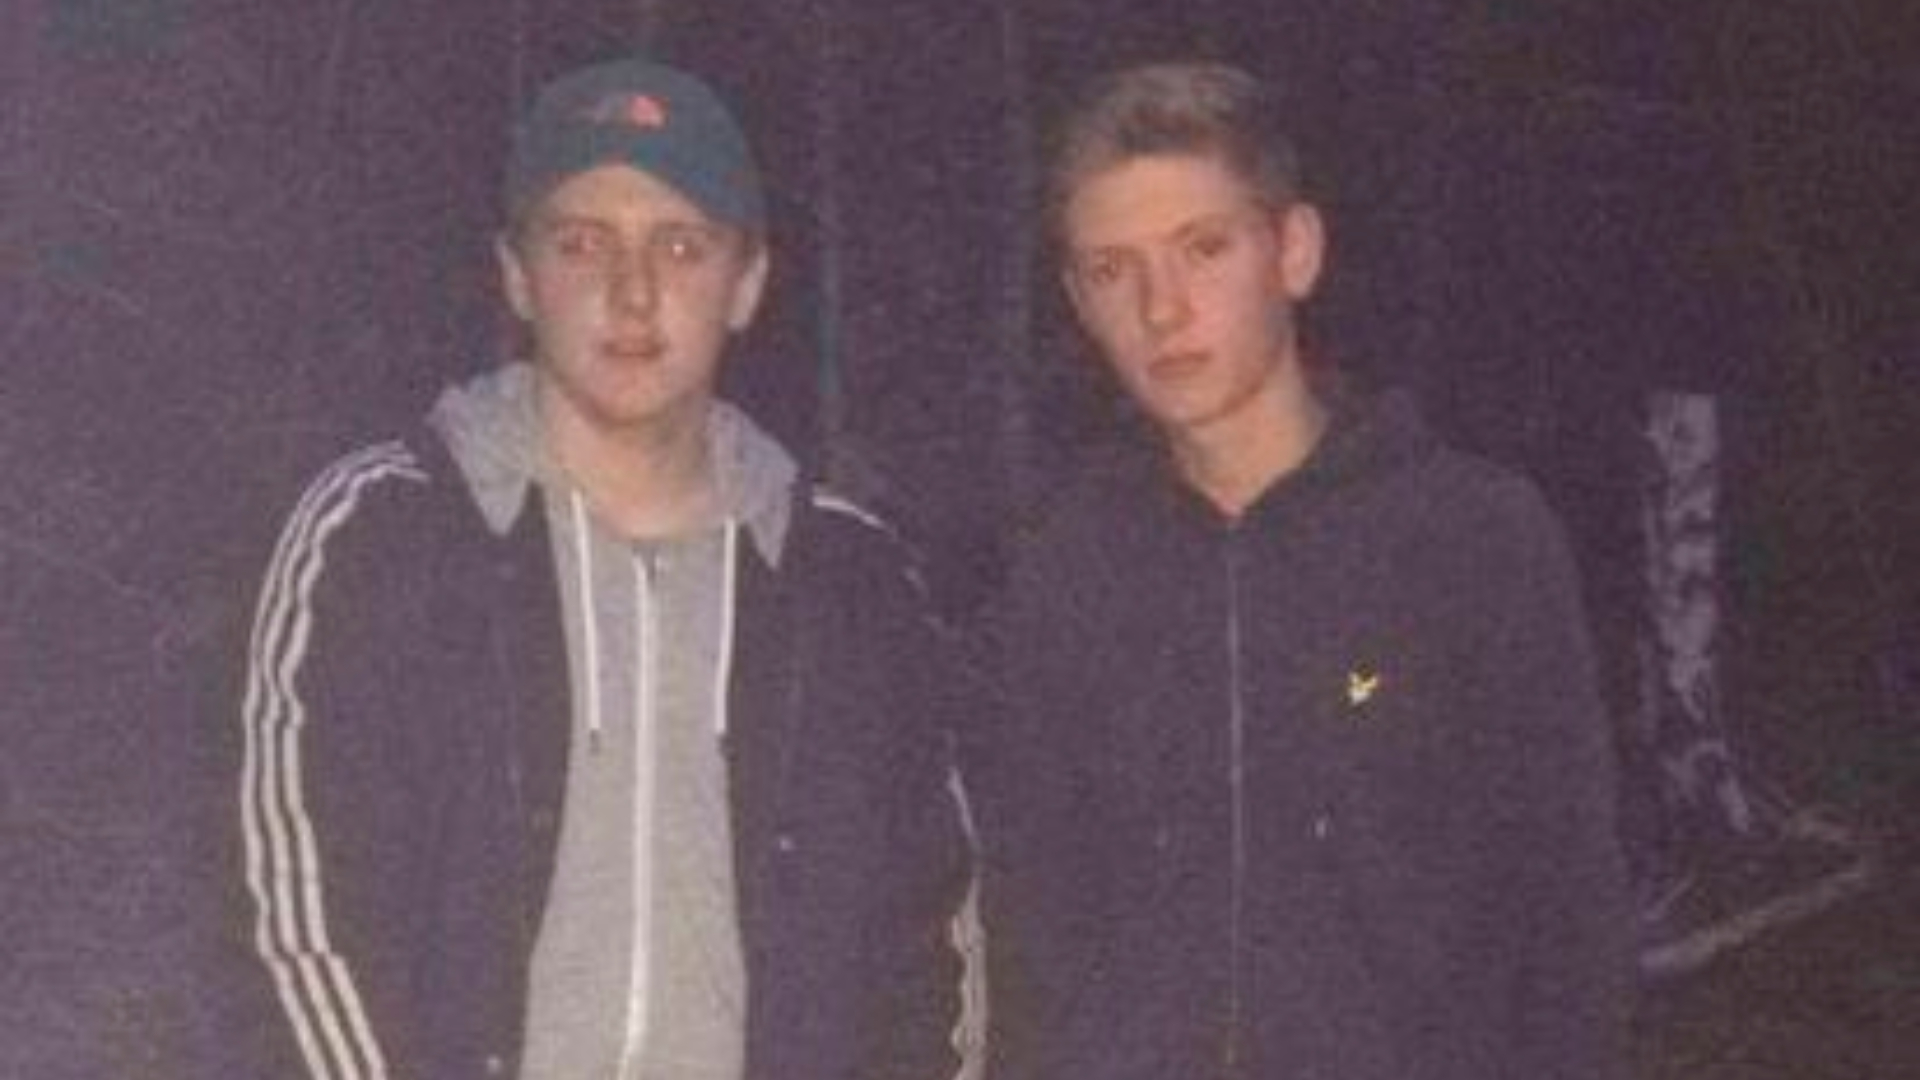 Troi Lawton (left), 23, and Connor Elgey (right), 19, were passengers in the motor and died as a result.